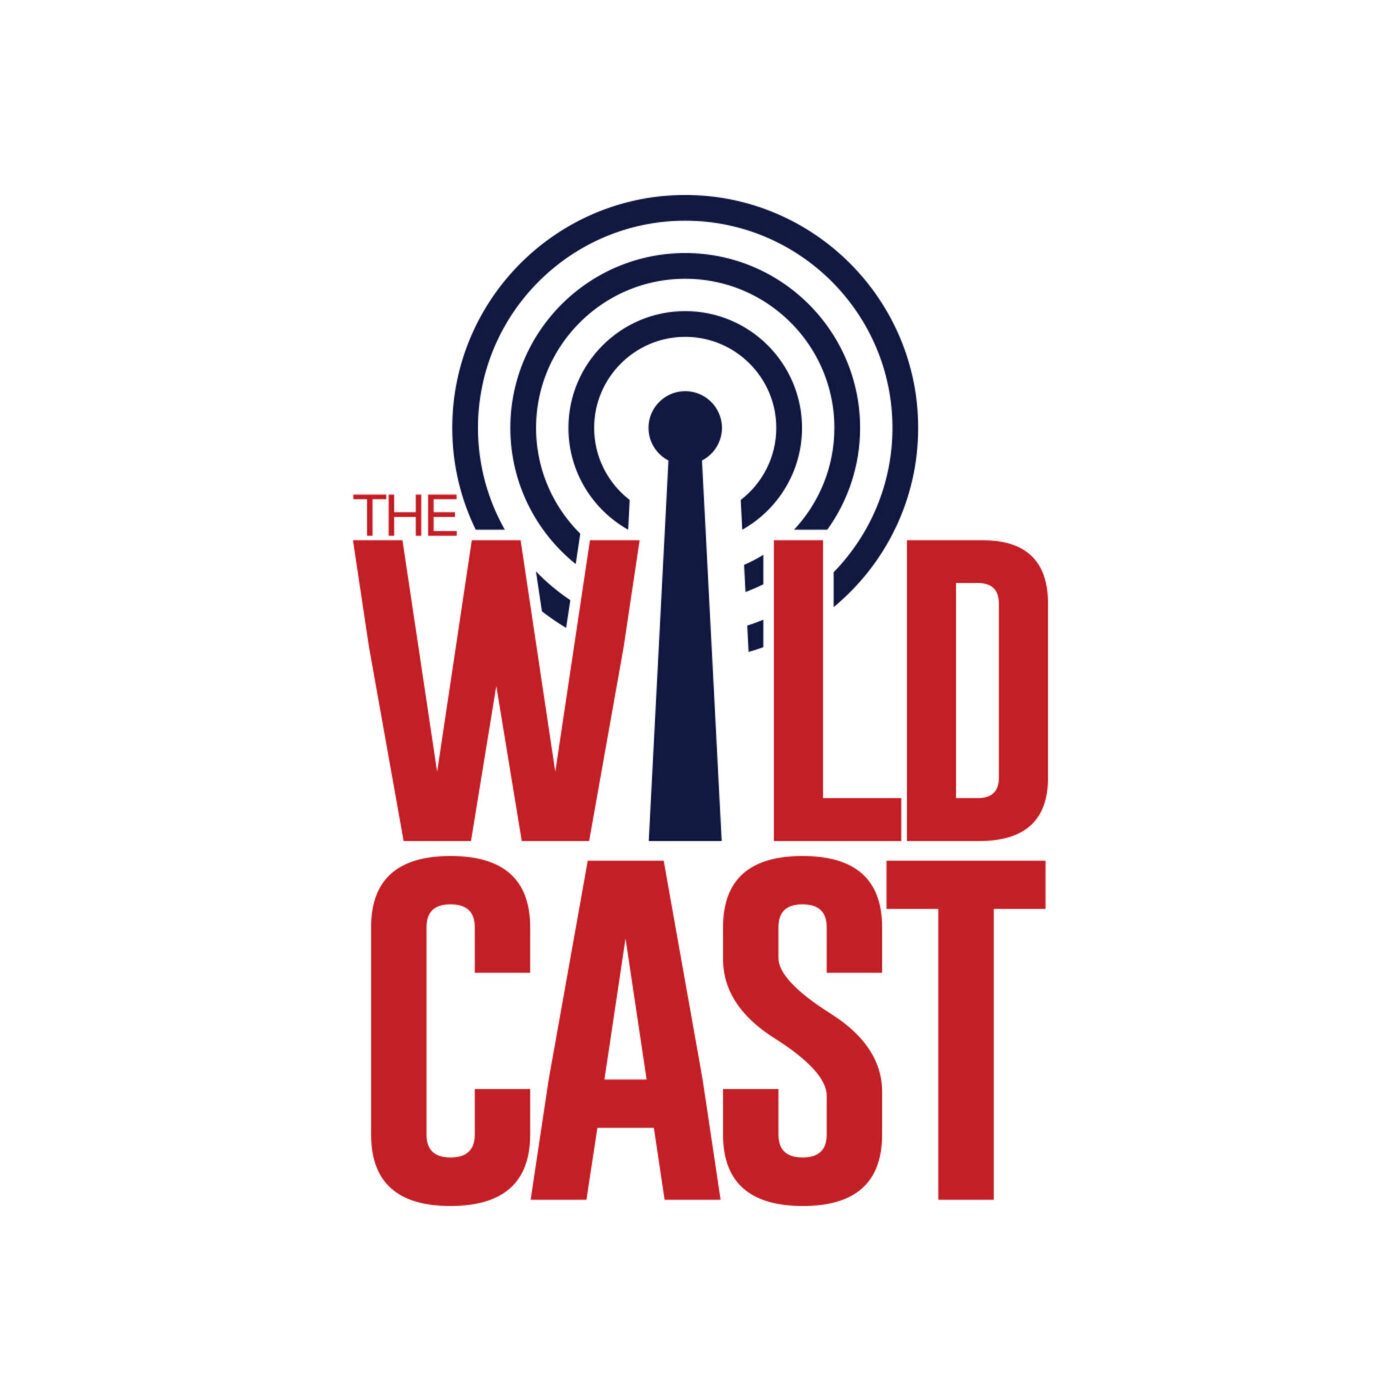 The Wildcast, Episode 411: Arizona gets served slice of humble pie after loss to Wazzu; UA women's team sweeps Oregon schools